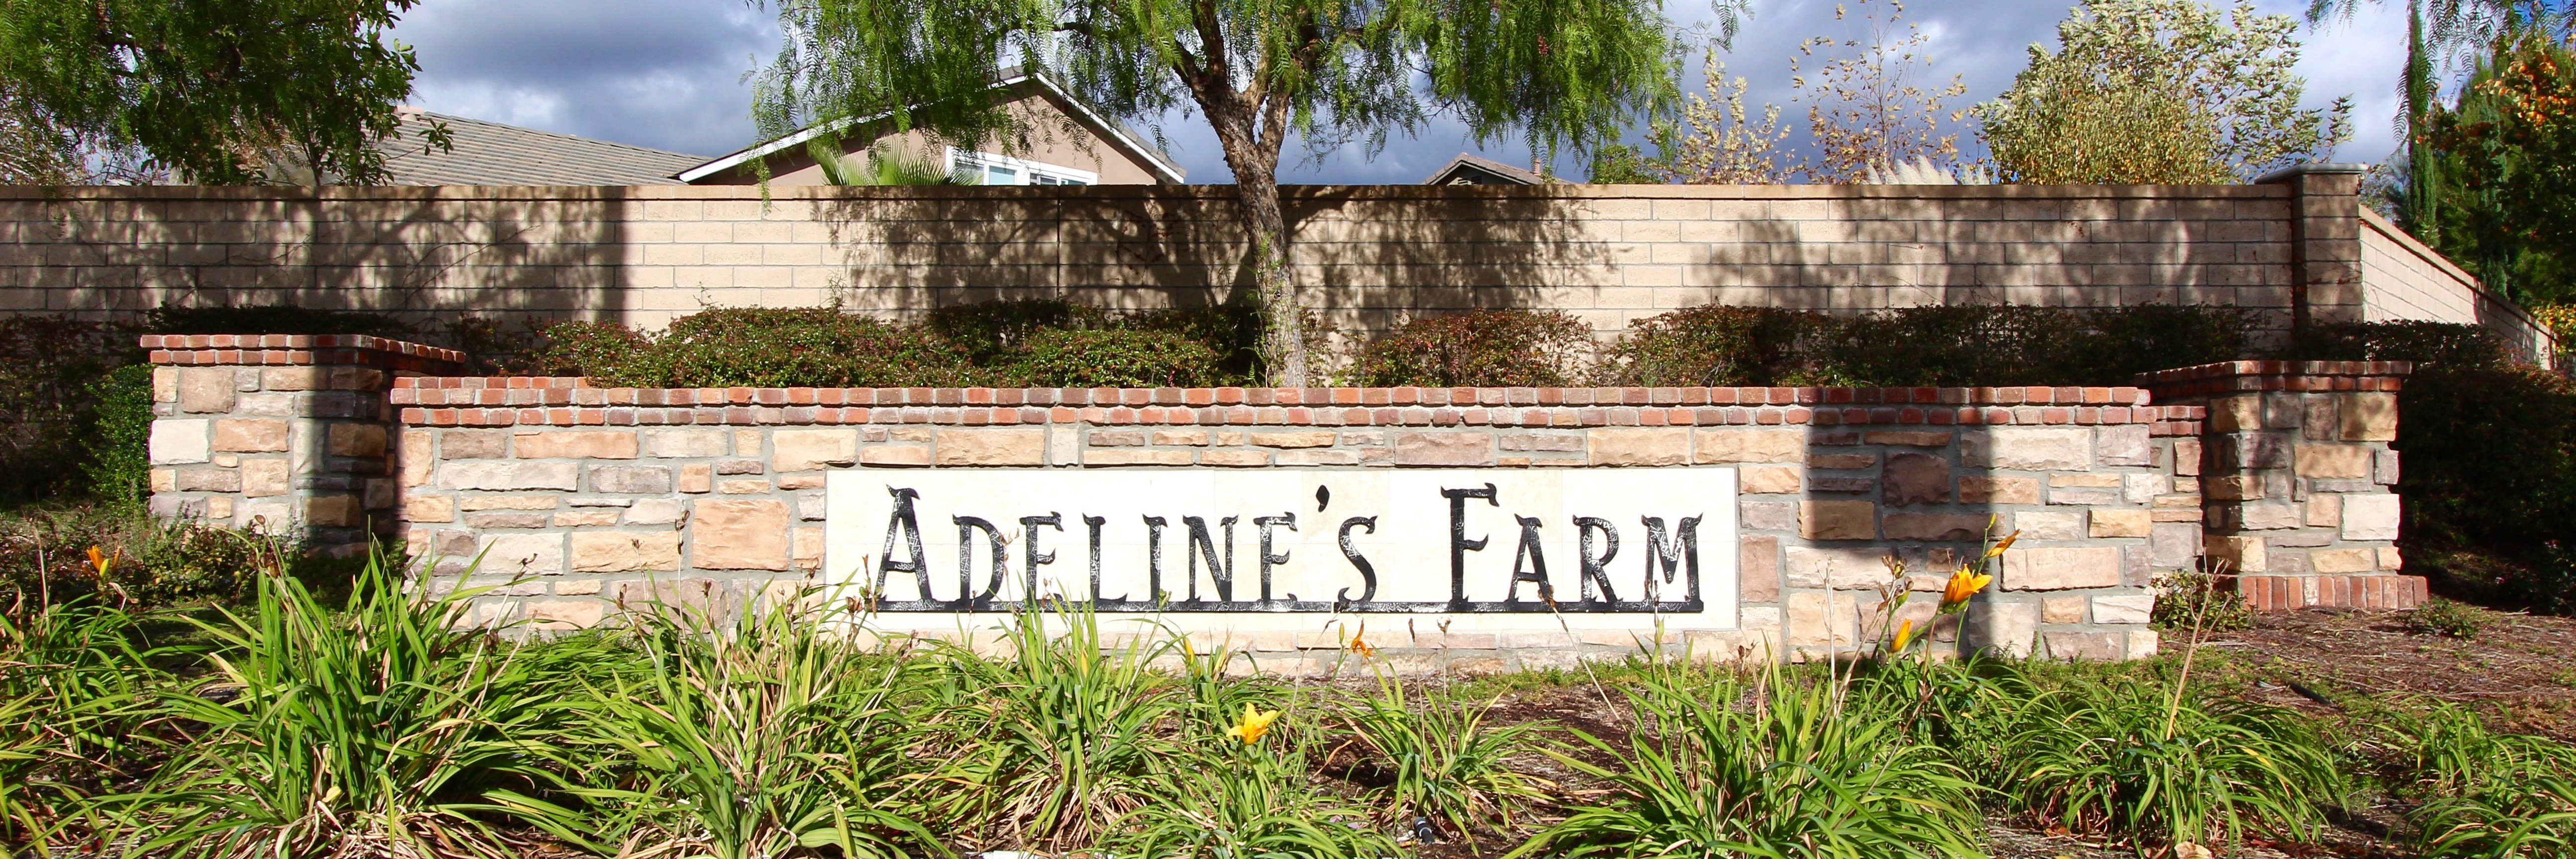 Adeline's Farm is a neighborhood located in Winchester California